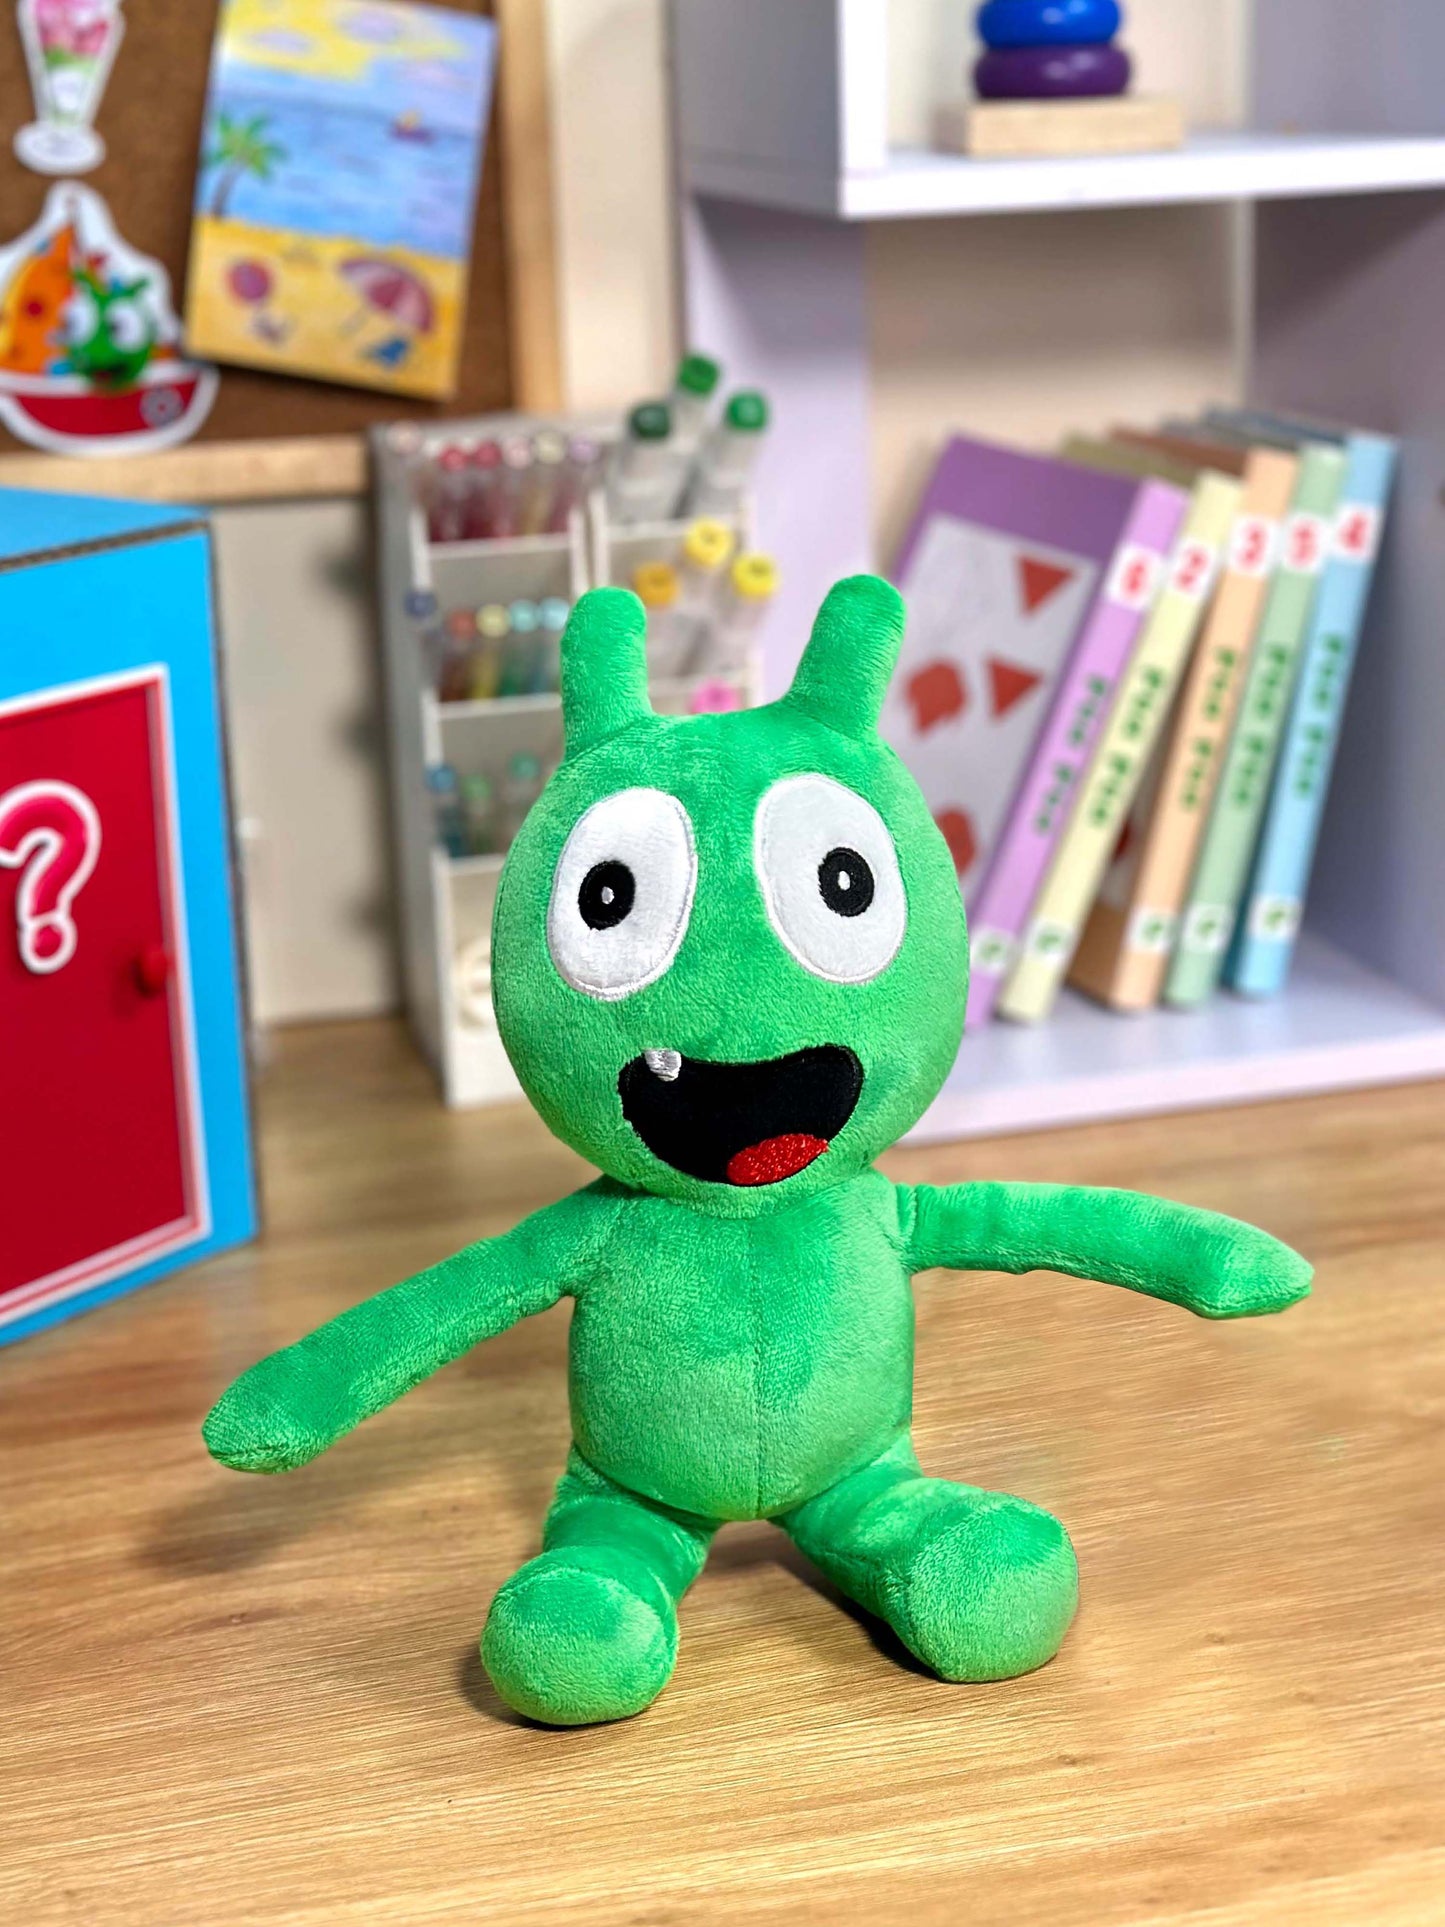 Pea Pea 11 inch Alien Plush Toy, Soft Stuffed Animal Toys, Plushies for Playtime and Naptime